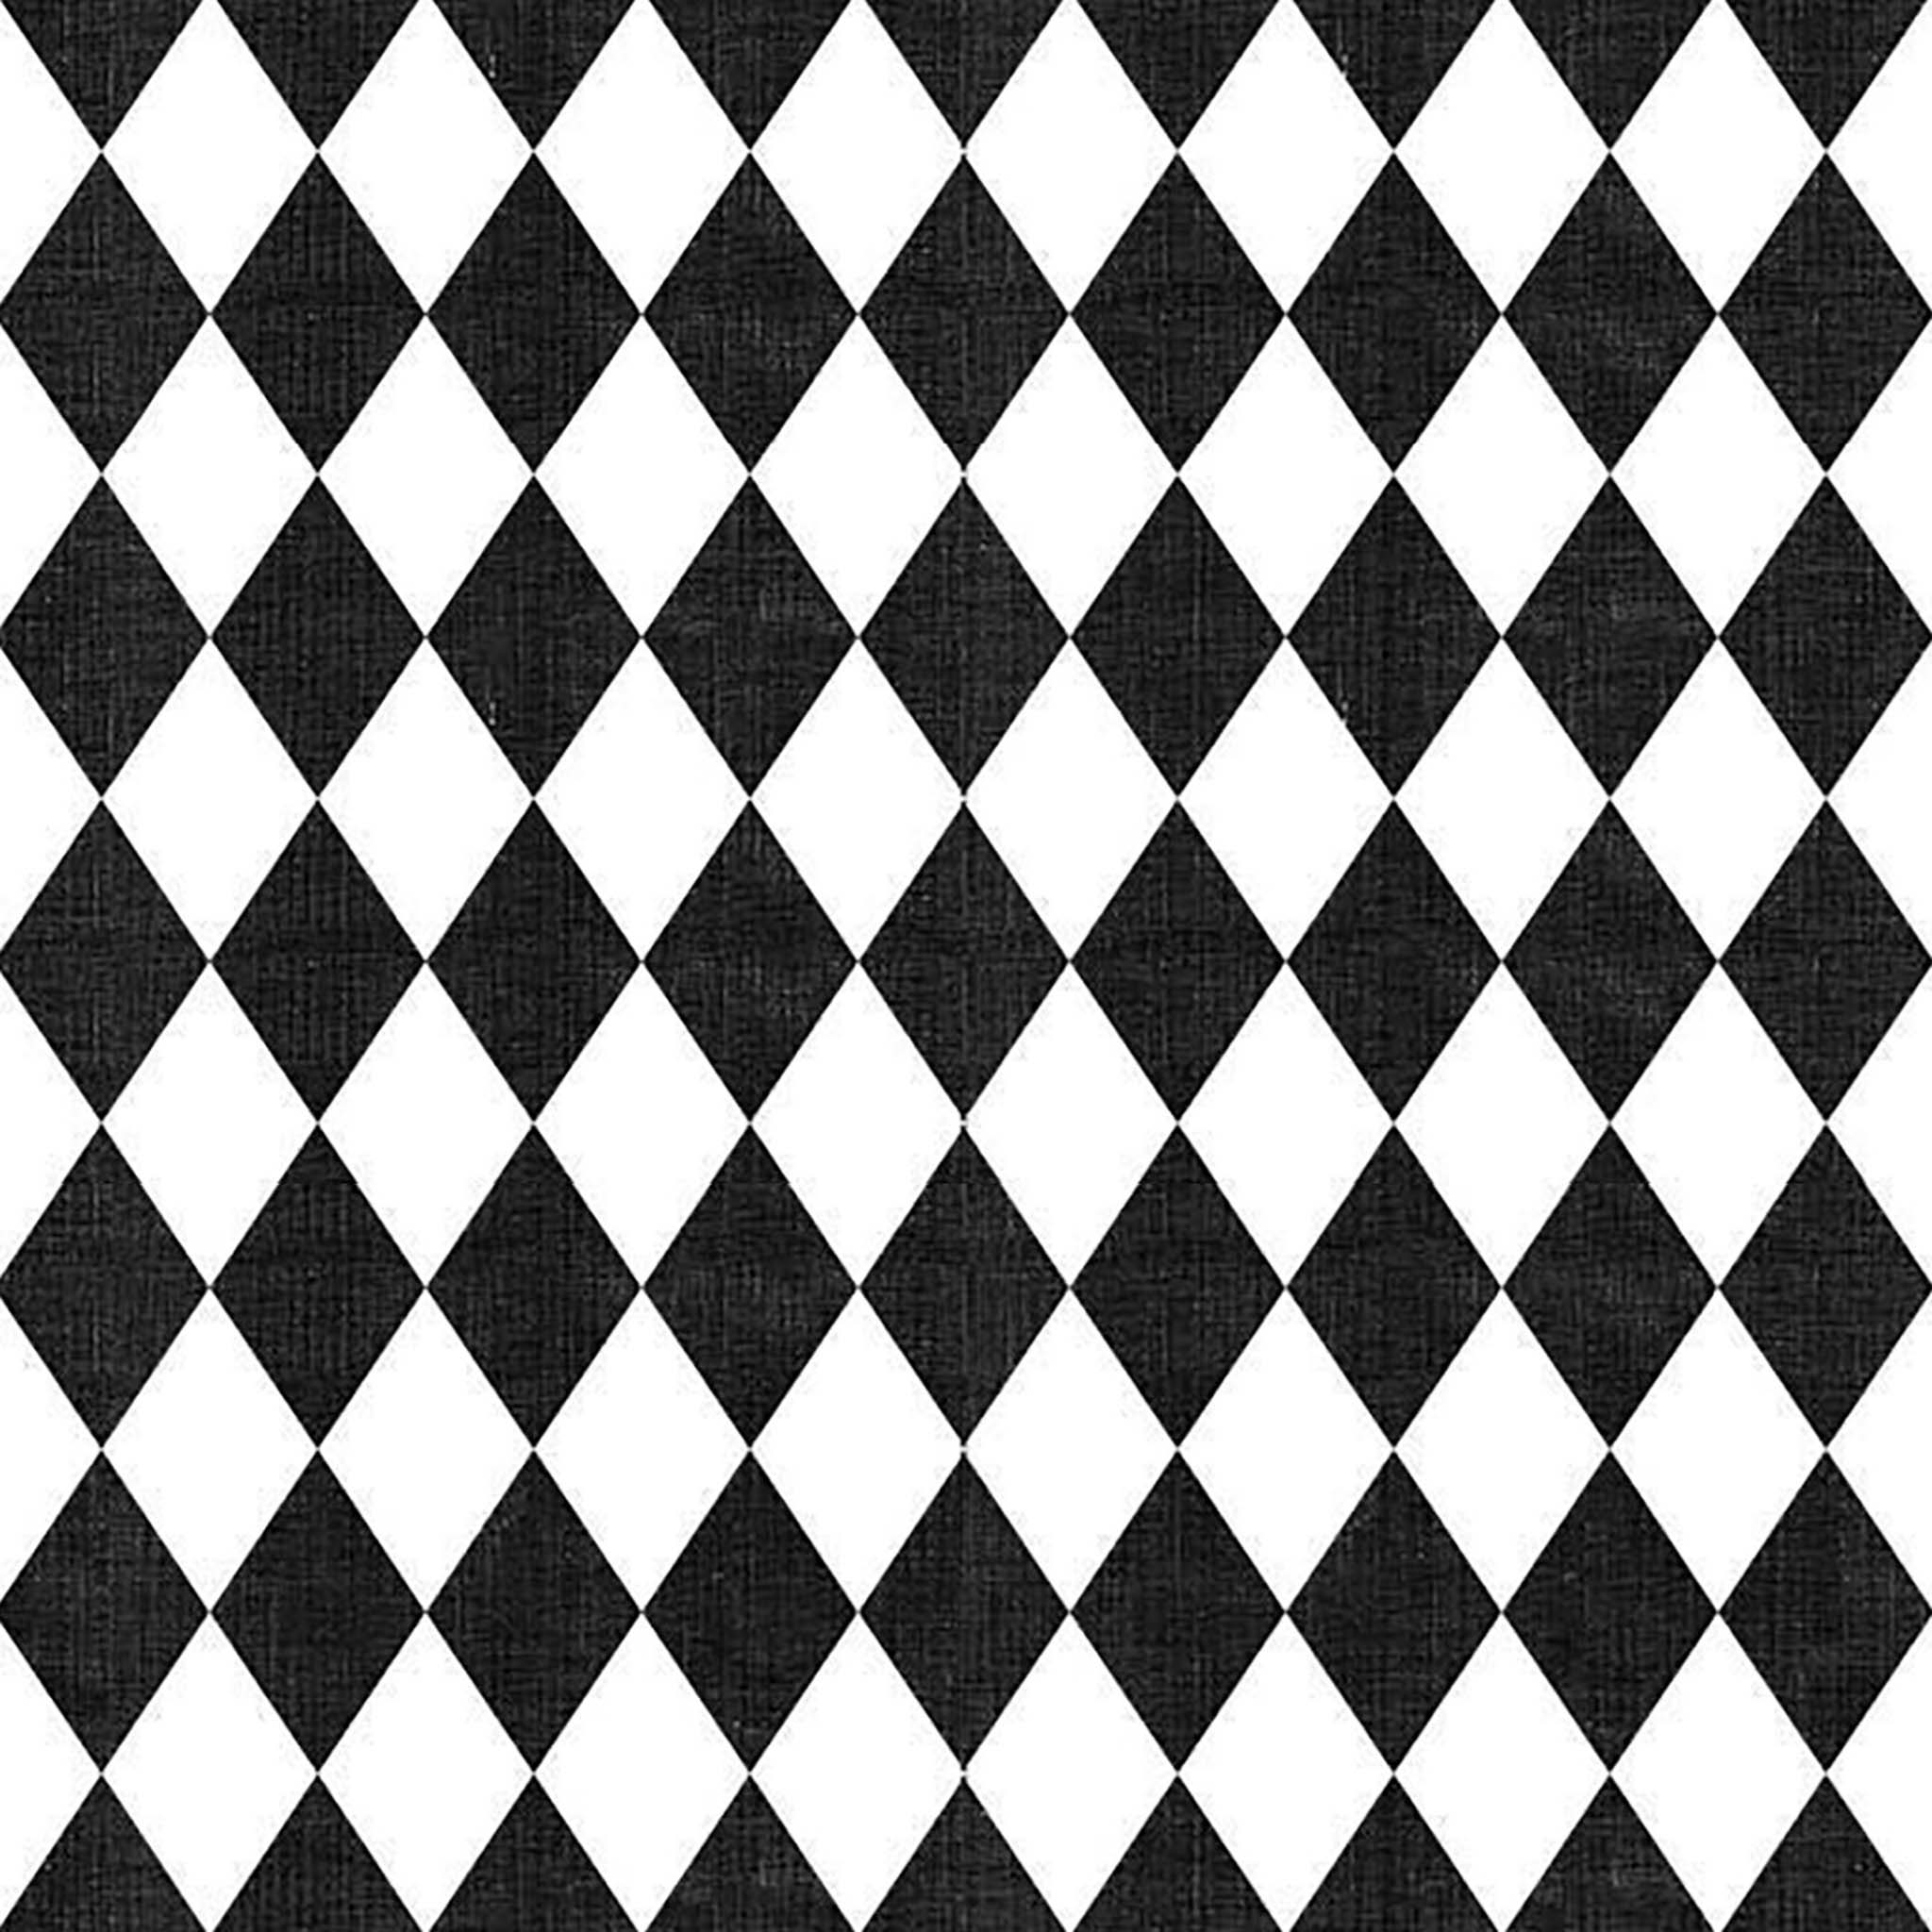 Close-up of a large rub-on transfer design of a repeating black harlequin diamonds design against a white background.